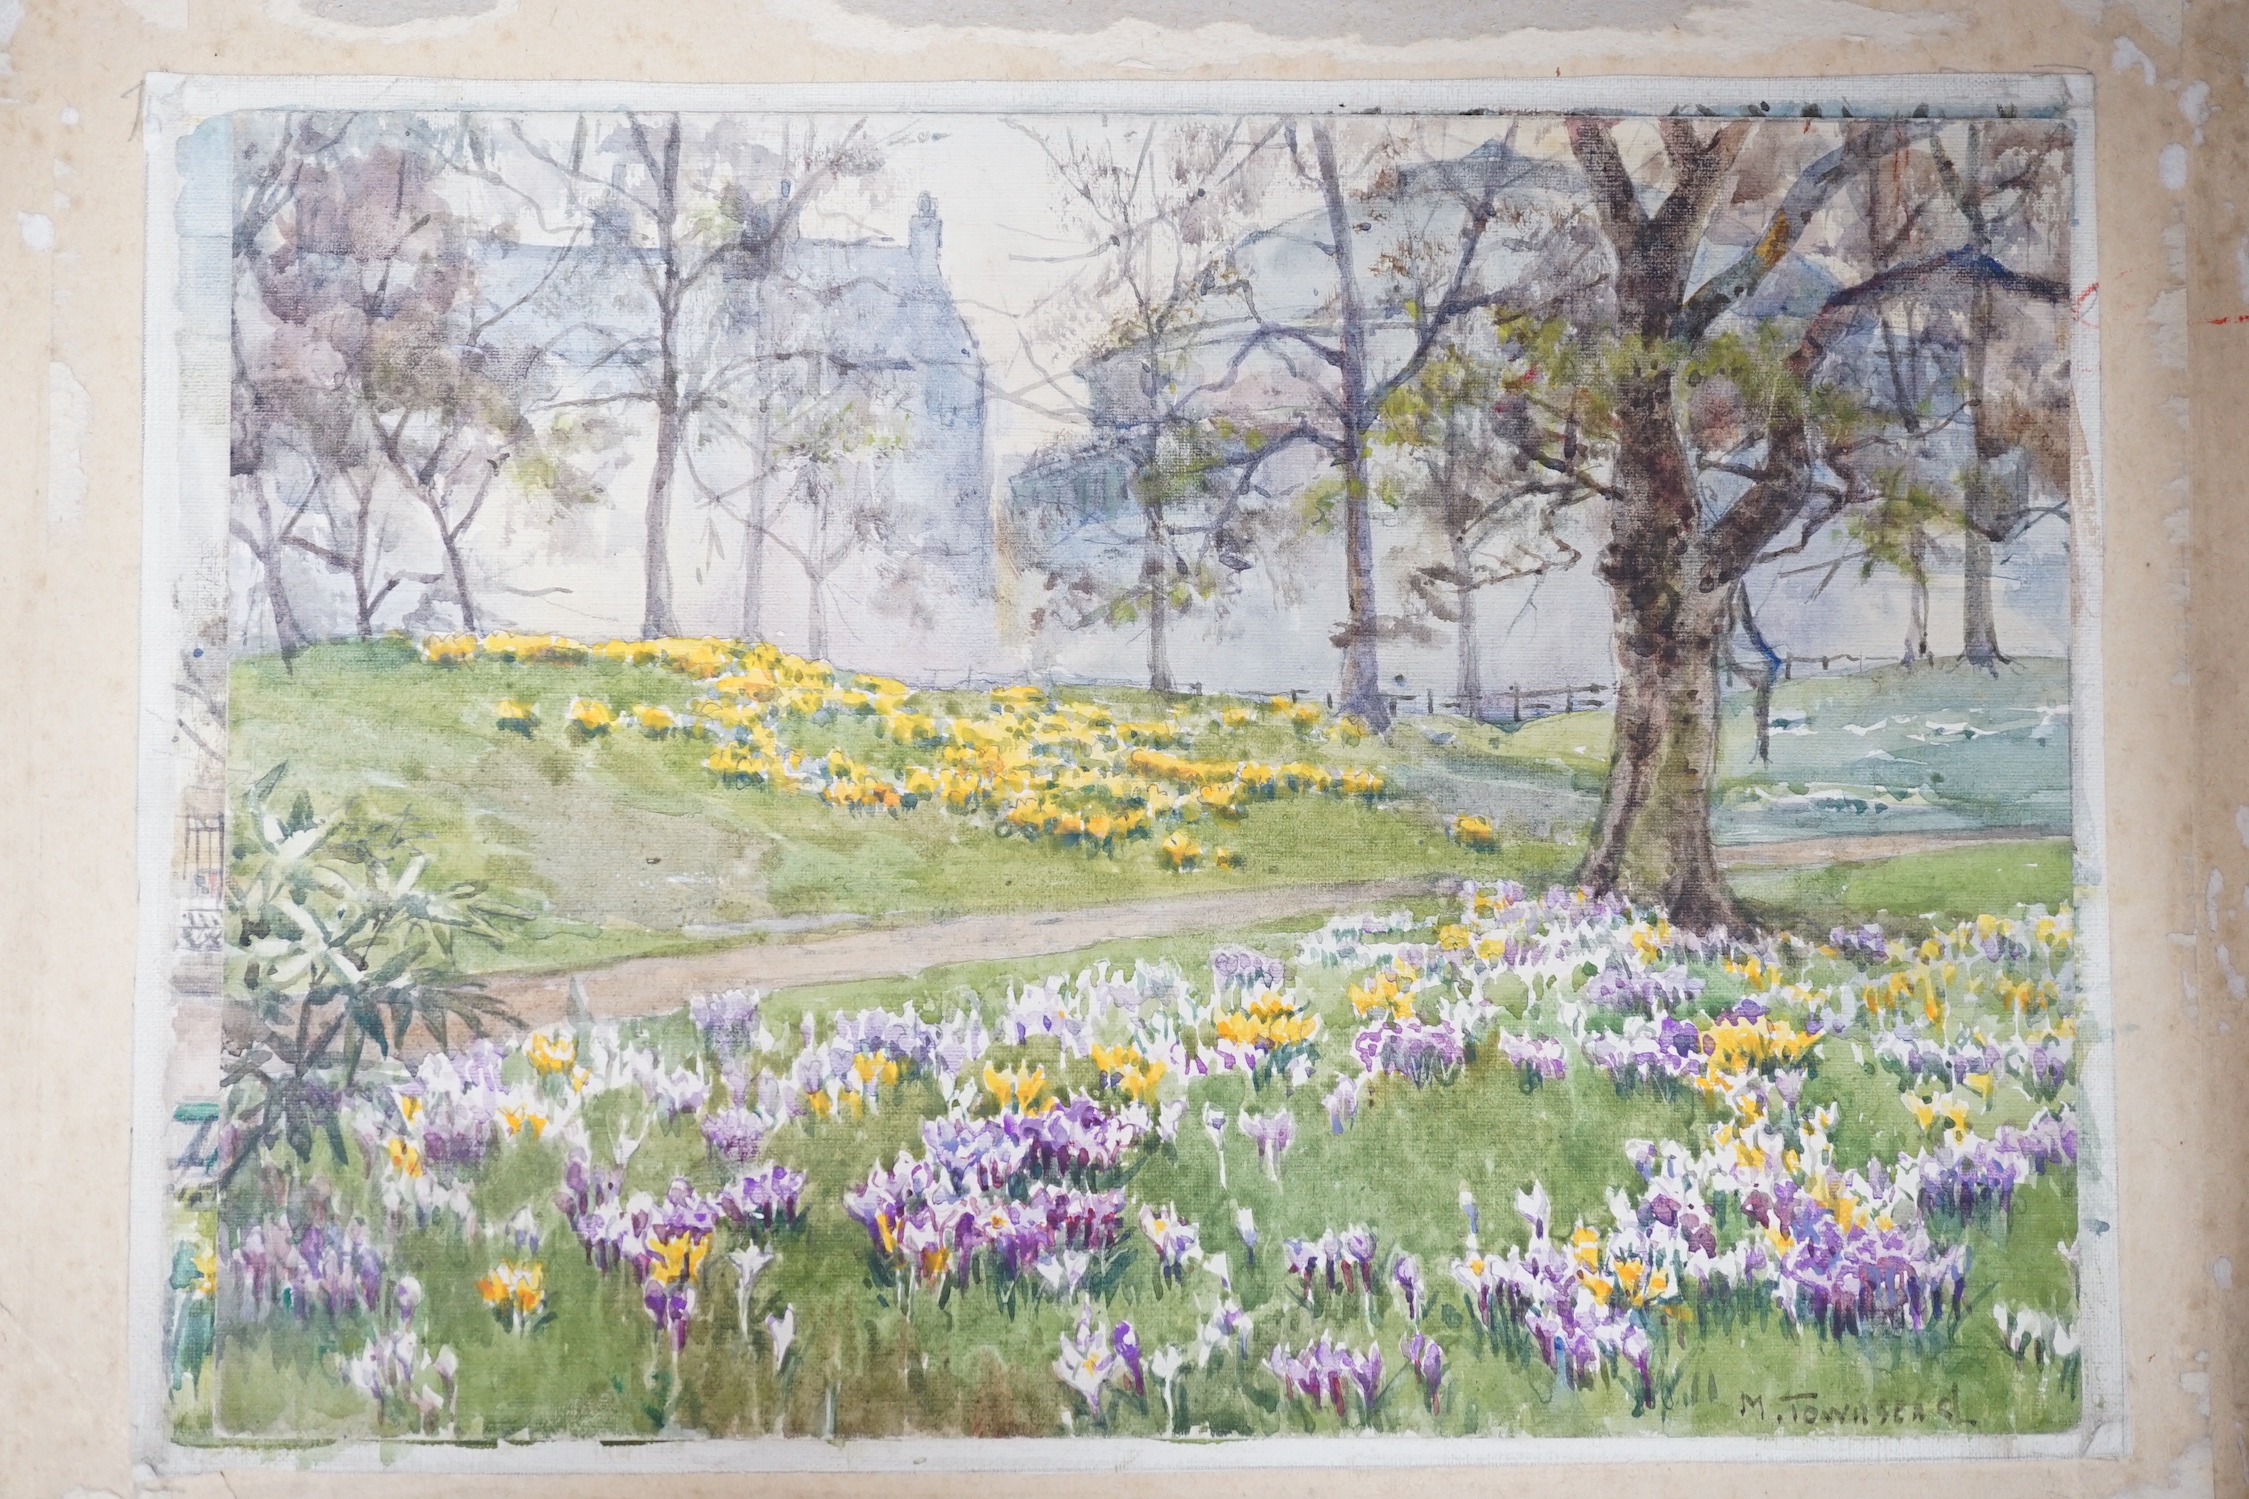 Harold Samuel Merritt and May Townsend, five watercolour landscapes by Merritt, Westmorland, Brittany and Shoreham Kent, largest 28 x 40cm, and two London Park views by Townsend, Kensington Gardens and Marble Arch, large